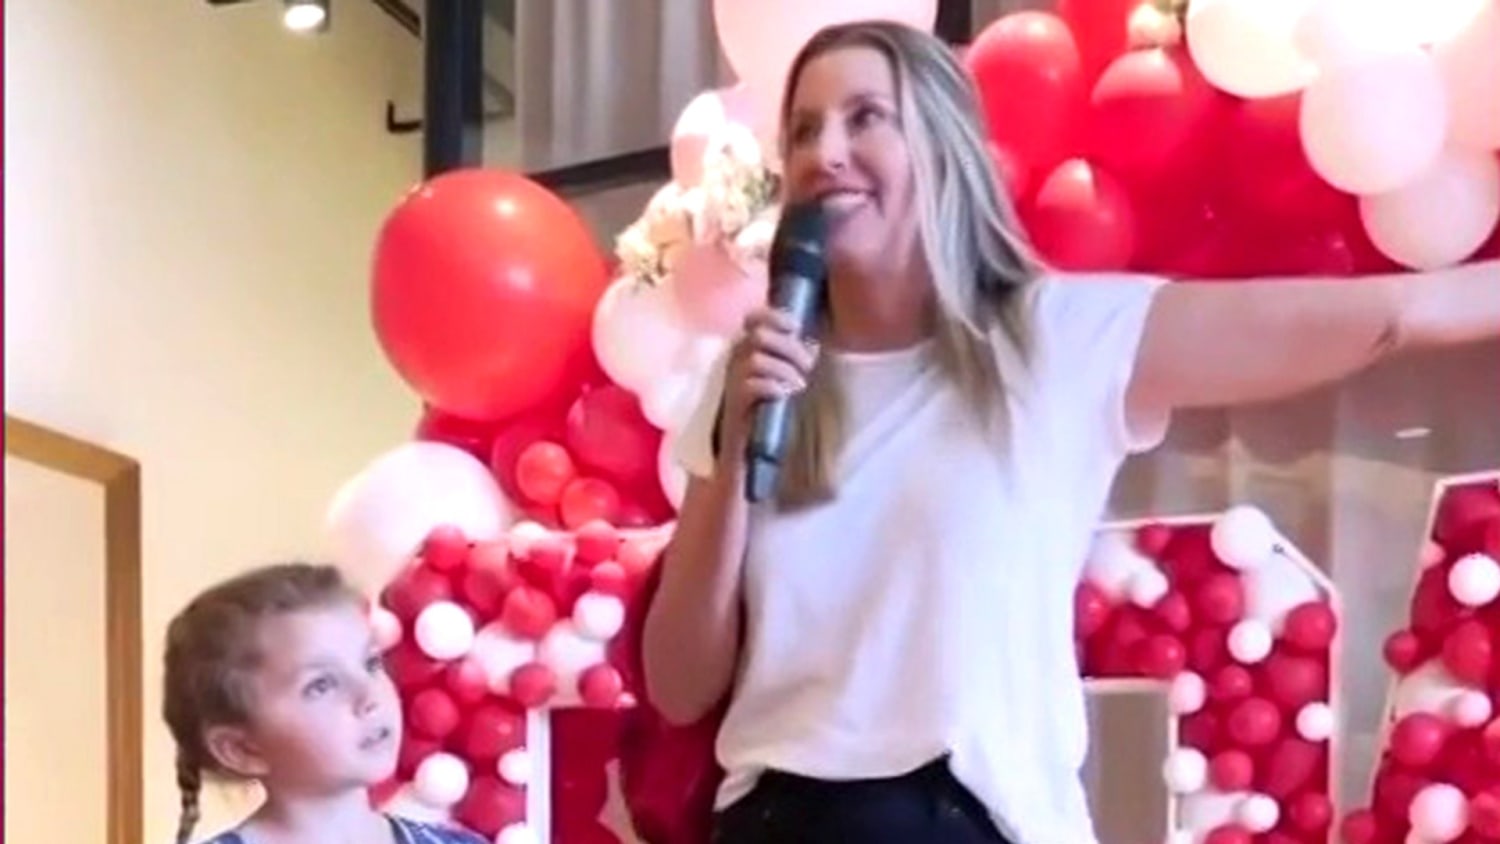 Spanx founder Sara Blakely gifts employees plane tickets, $10,000